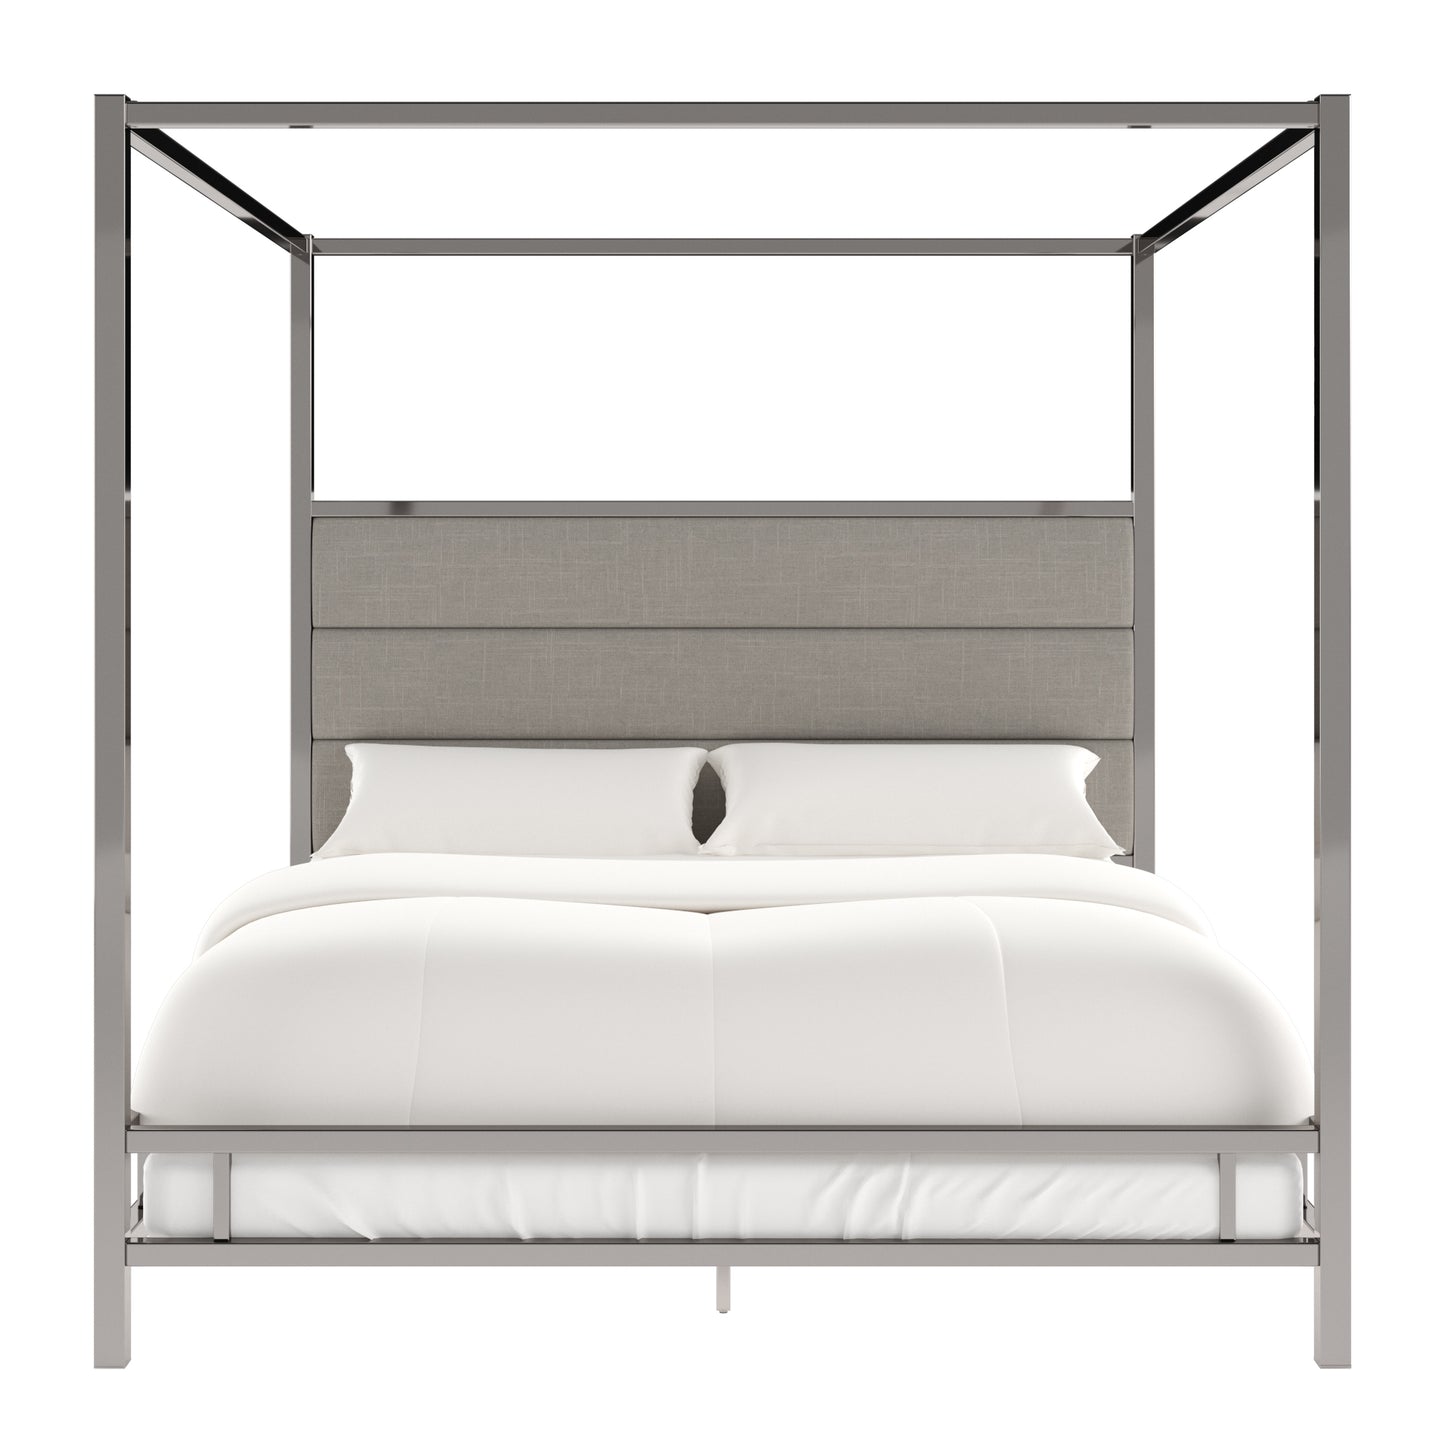 Metal Canopy Bed with Upholstered Headboard - Grey Linen, Chrome Finish, King Size